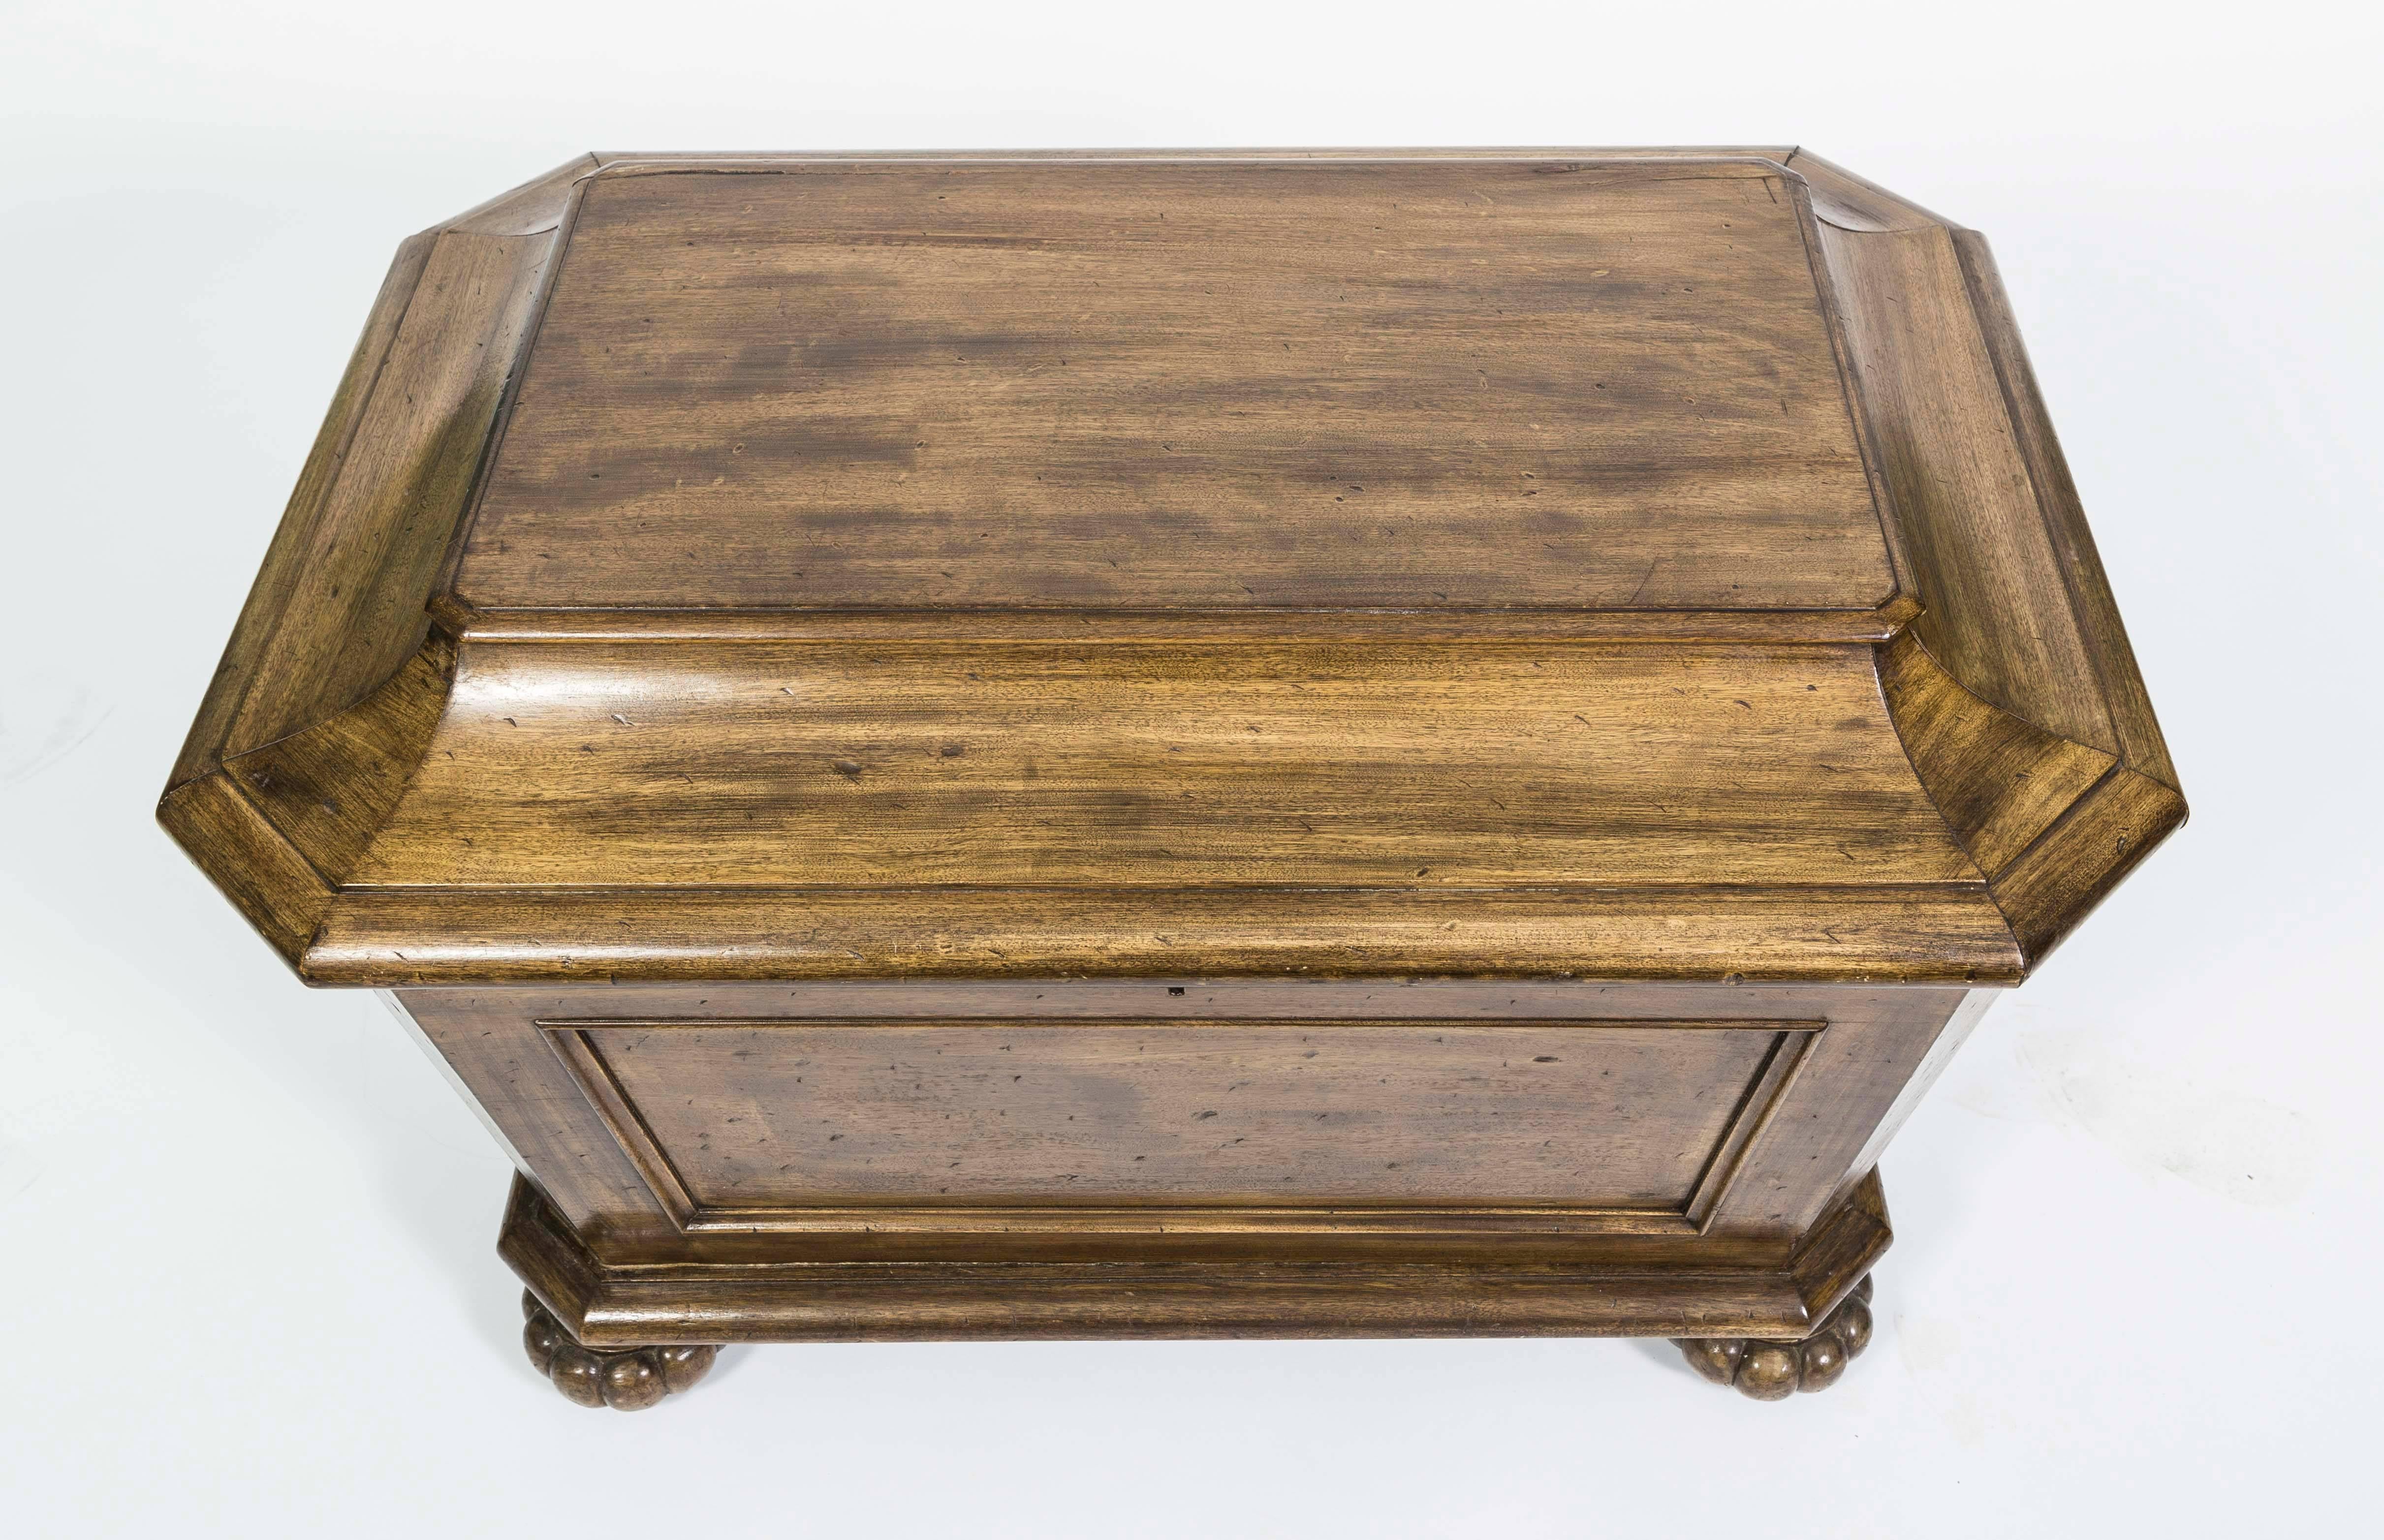 A Victorian sarcophagus shaped cellarette.  The Cooler is made of mahogany and the box features a rectangular top with beveled edges and four bun feet, with a lead lined and divided interior. Has multiple divisions in the interior.  The Cellerette